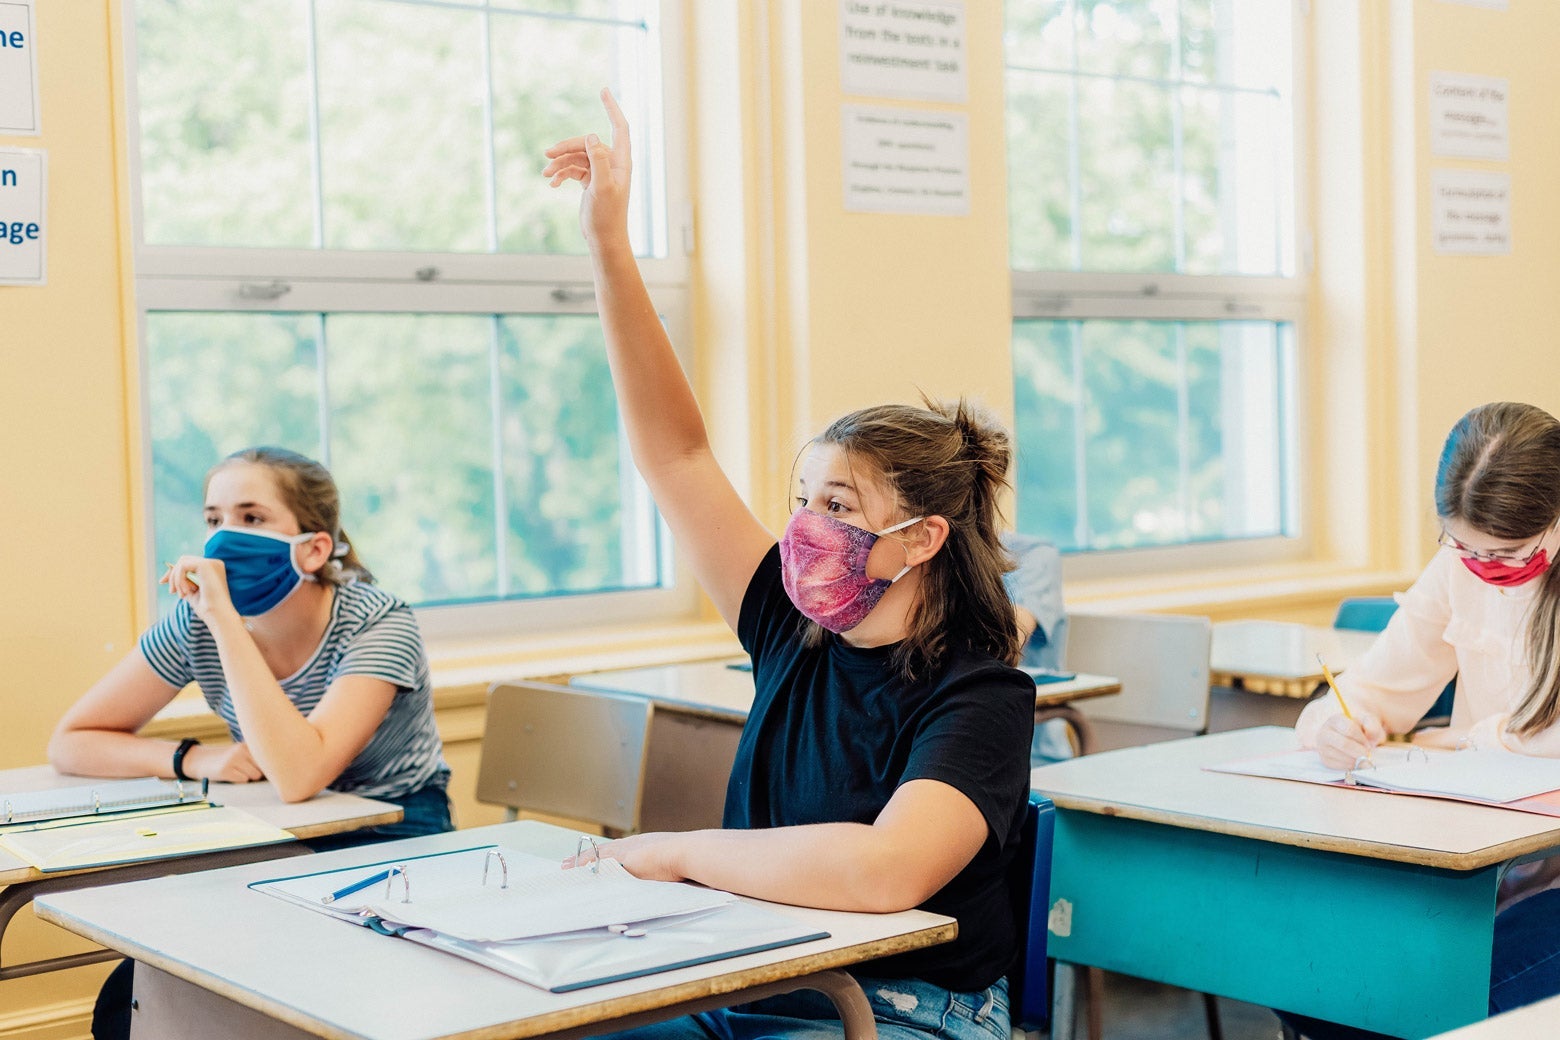 Three students wearing masks sit at spaced-out desks in a classroom. One student raises her hand.